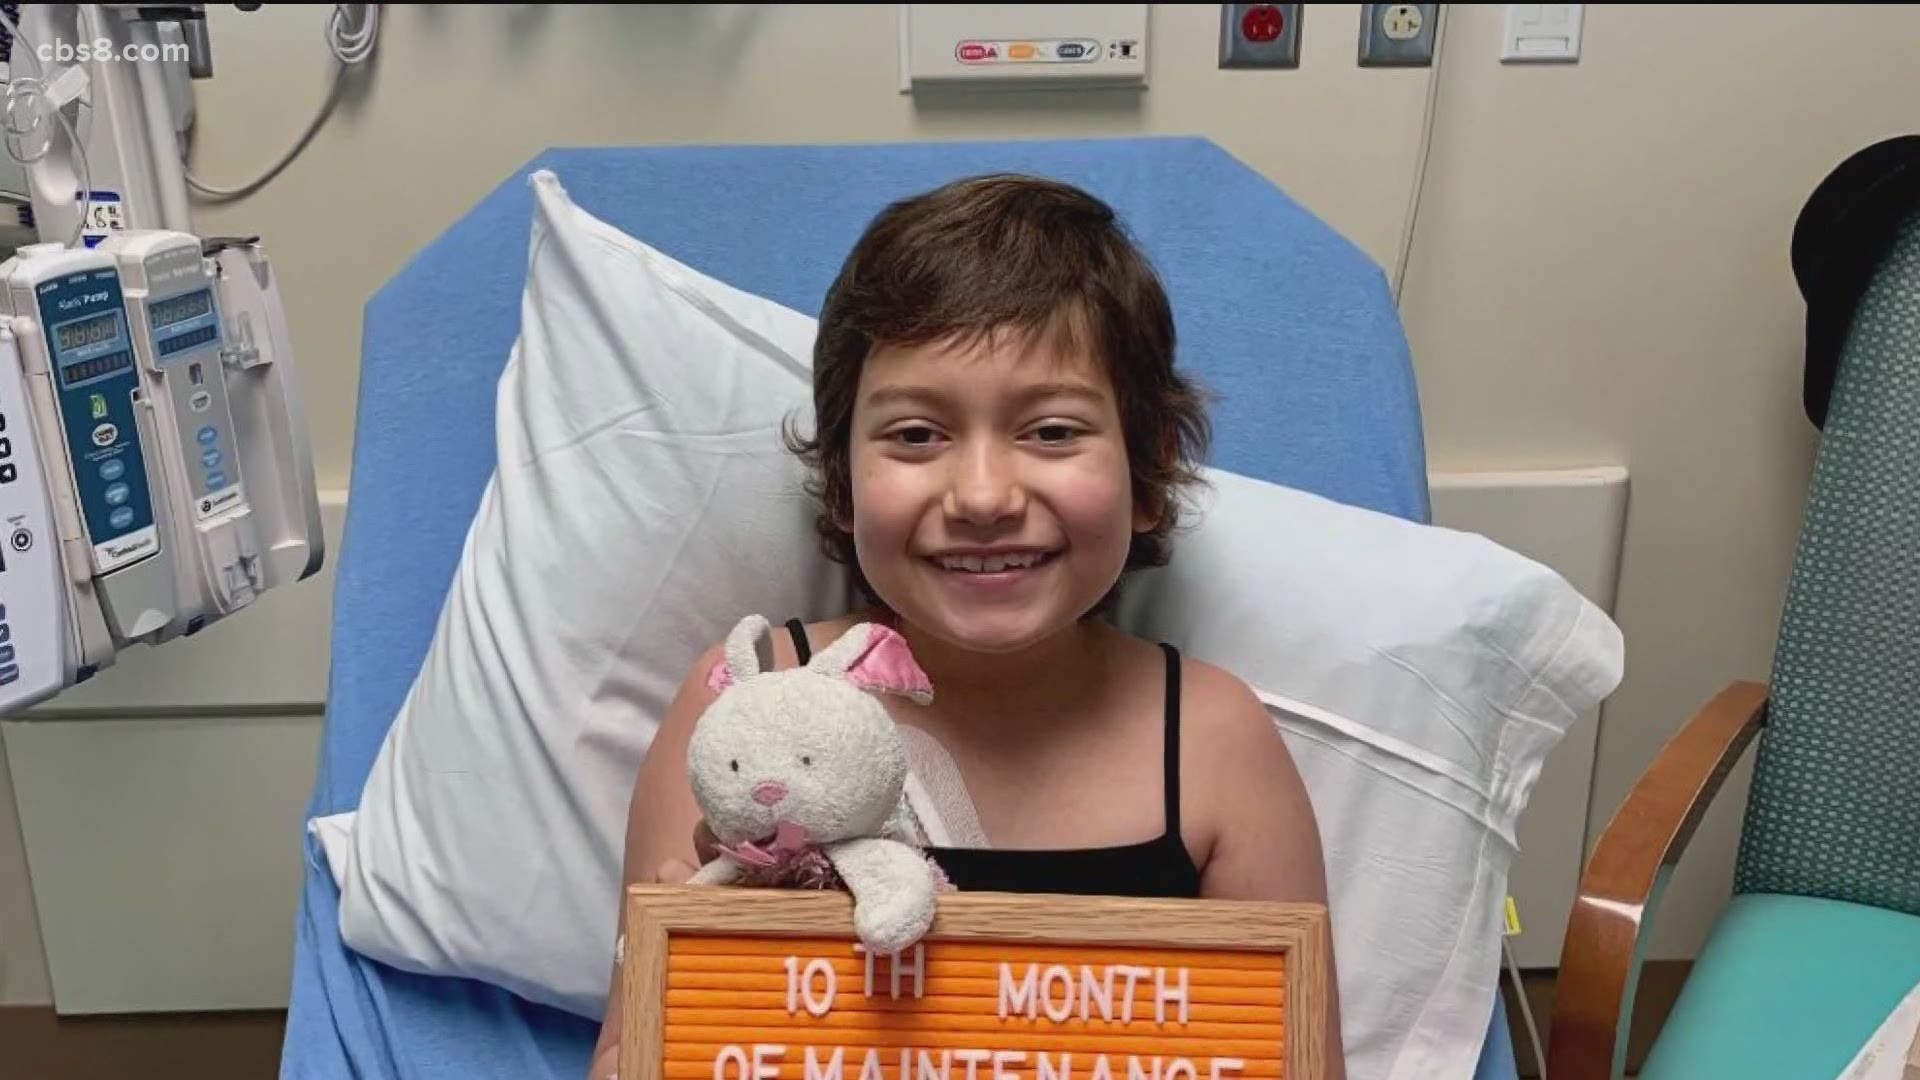 A nonprofit needs your help to fulfill a dinosaur dream for 9-year-old Jocelyn Croxen who is fighting an acute form of leukemia.